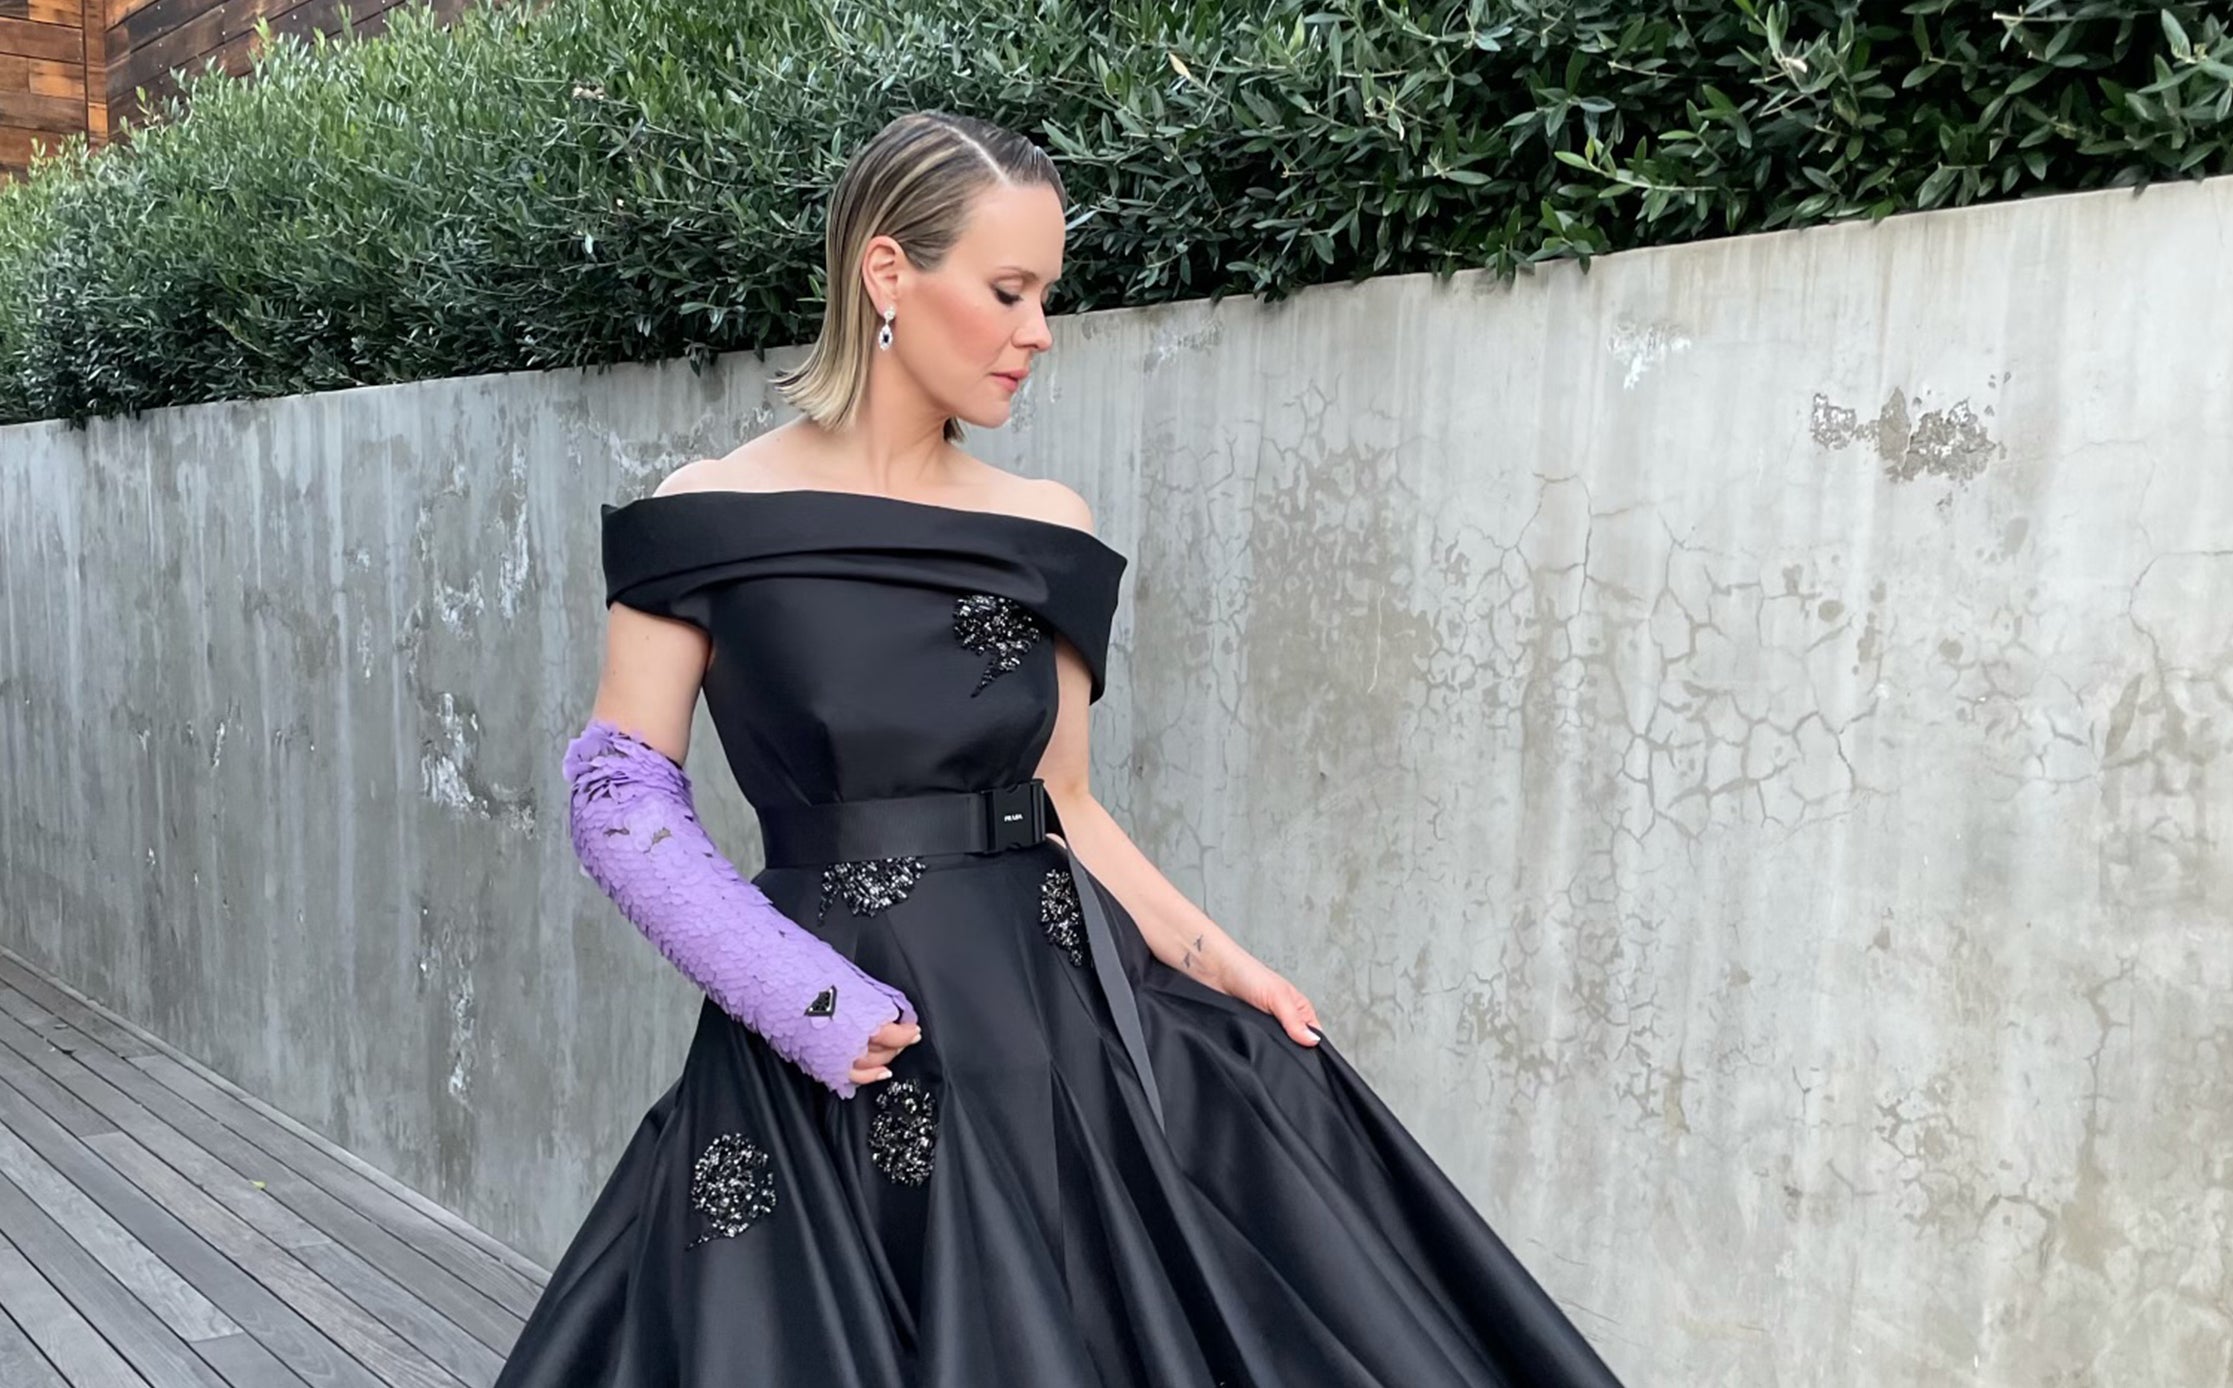 Sarah Paulson’s outfit for the 78th Annual Golden Globe Awards